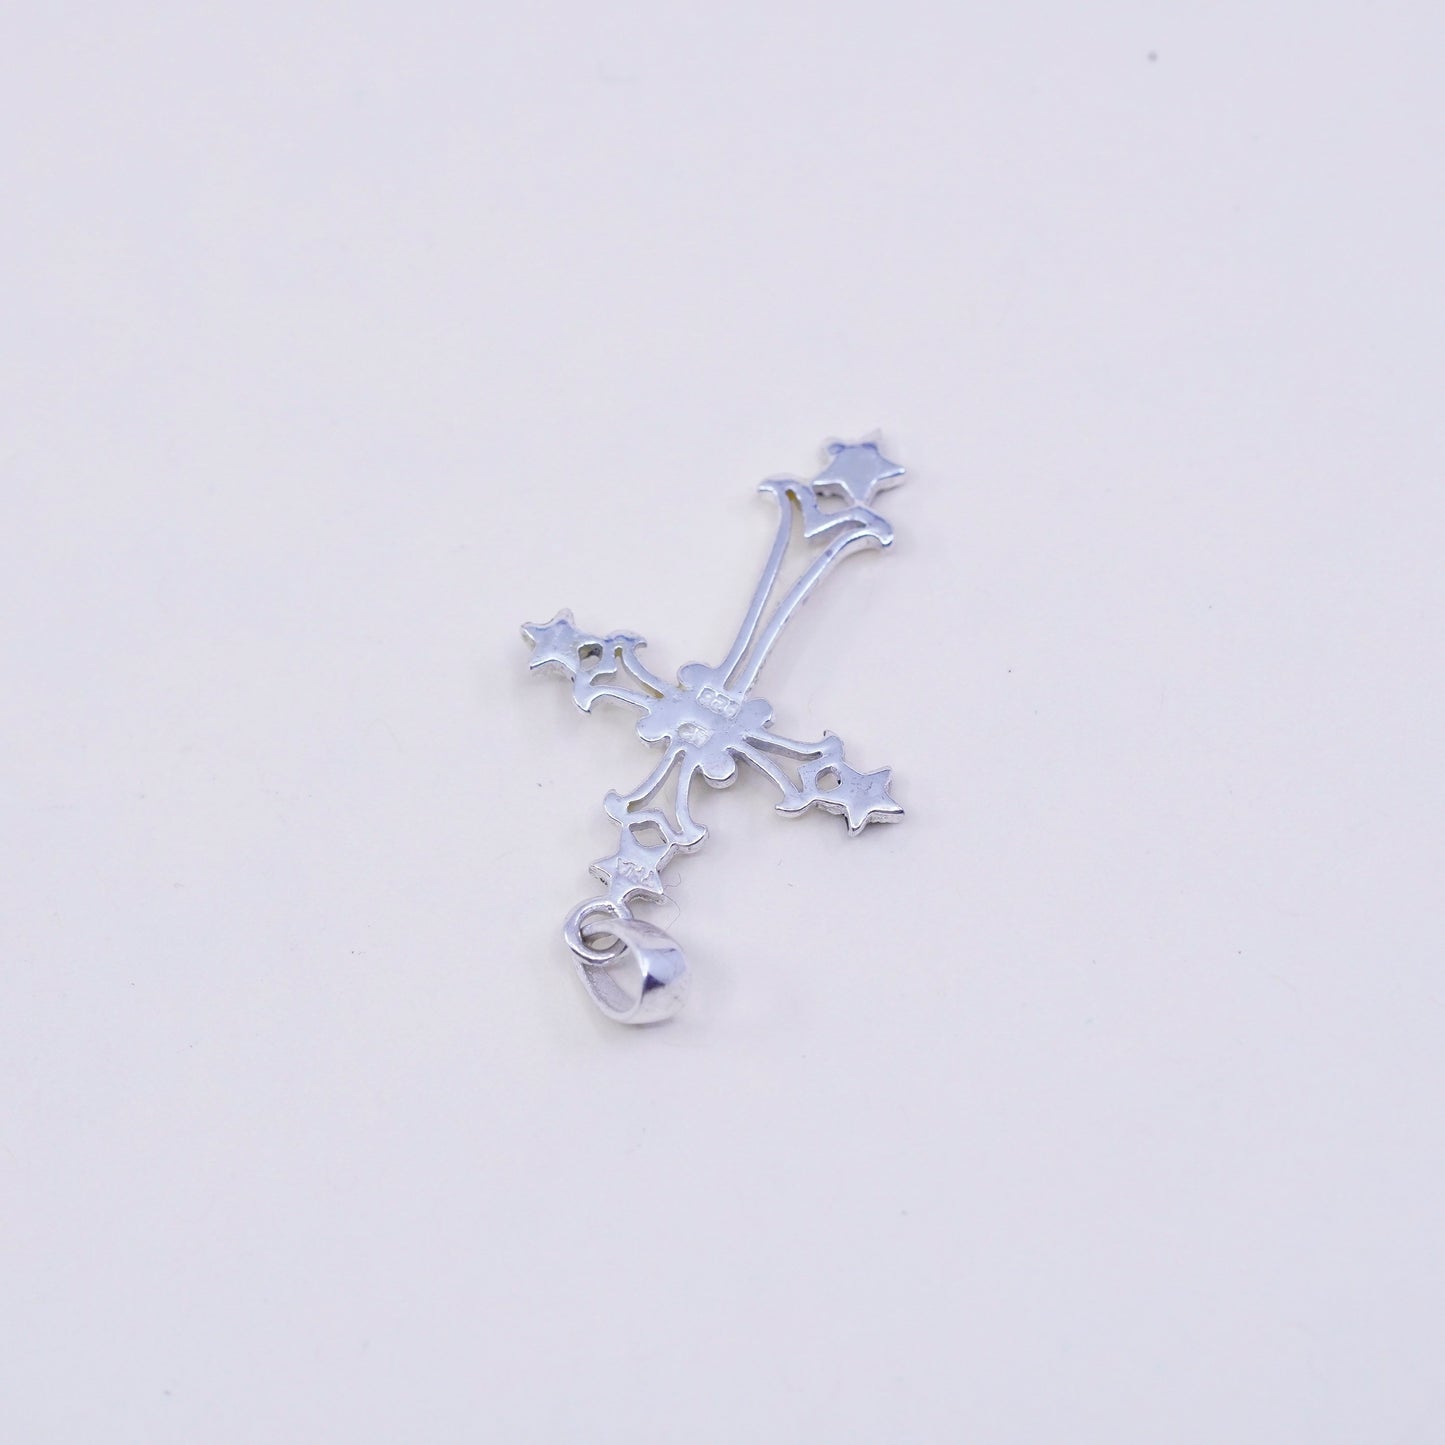 Vintage handmade sterling 925 silver cross pendant with marcasite